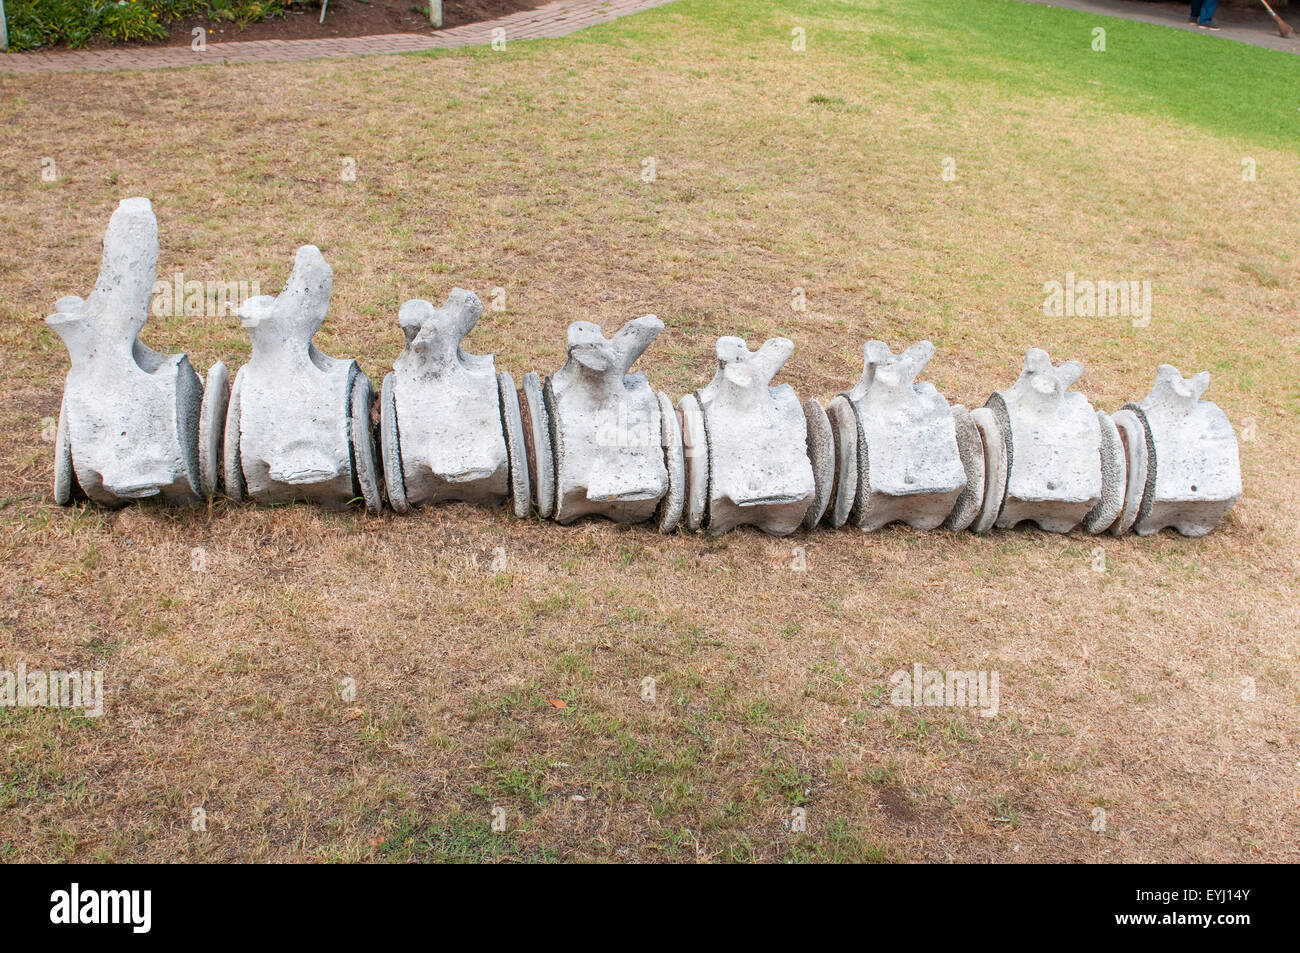 Whale vertebrae on display in the garden of the Diaz Museum in Mosselbay, South Africa Stock Photo